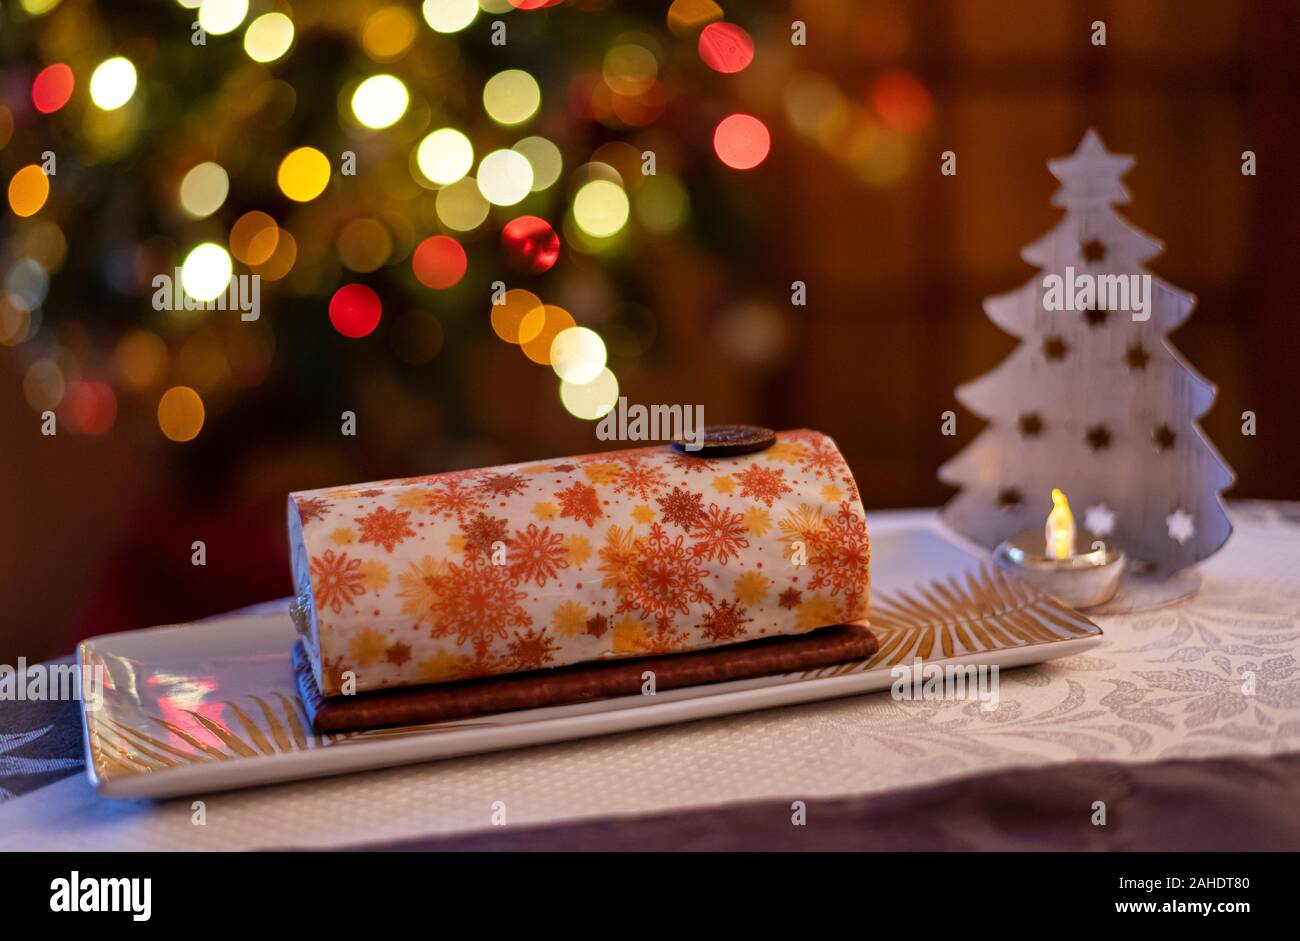 Yule log roll cake for Christmas decorated with magnificent patterns with a colorful bokeh background. Stock Photo